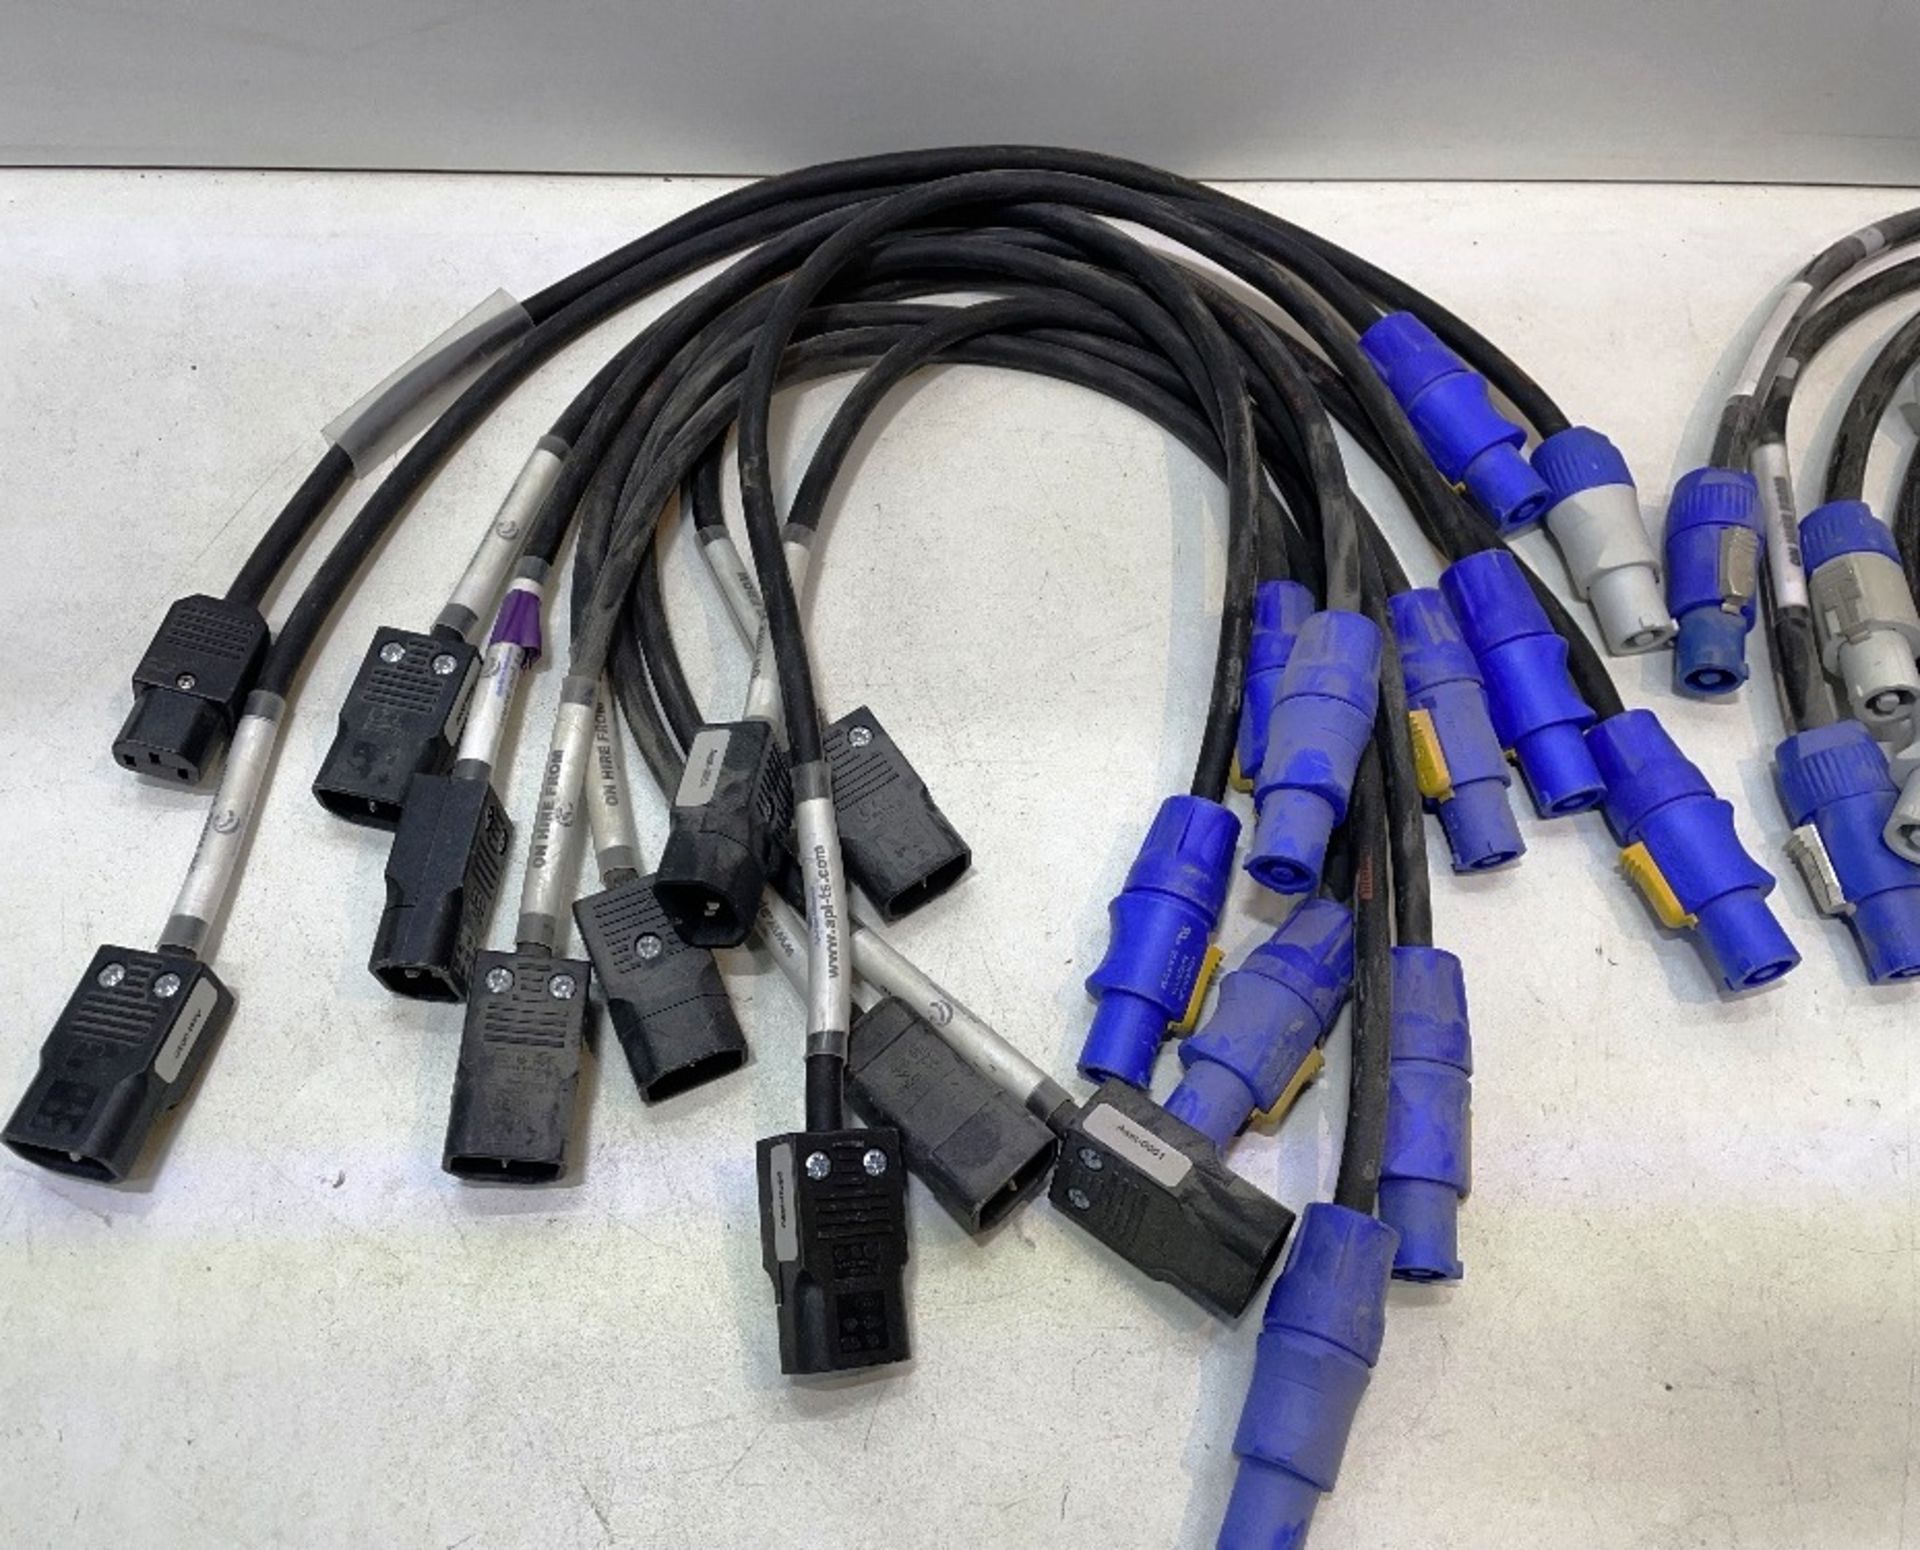 20 x Various Powercon Shorts & IEC to Powercon Cables - Image 2 of 4